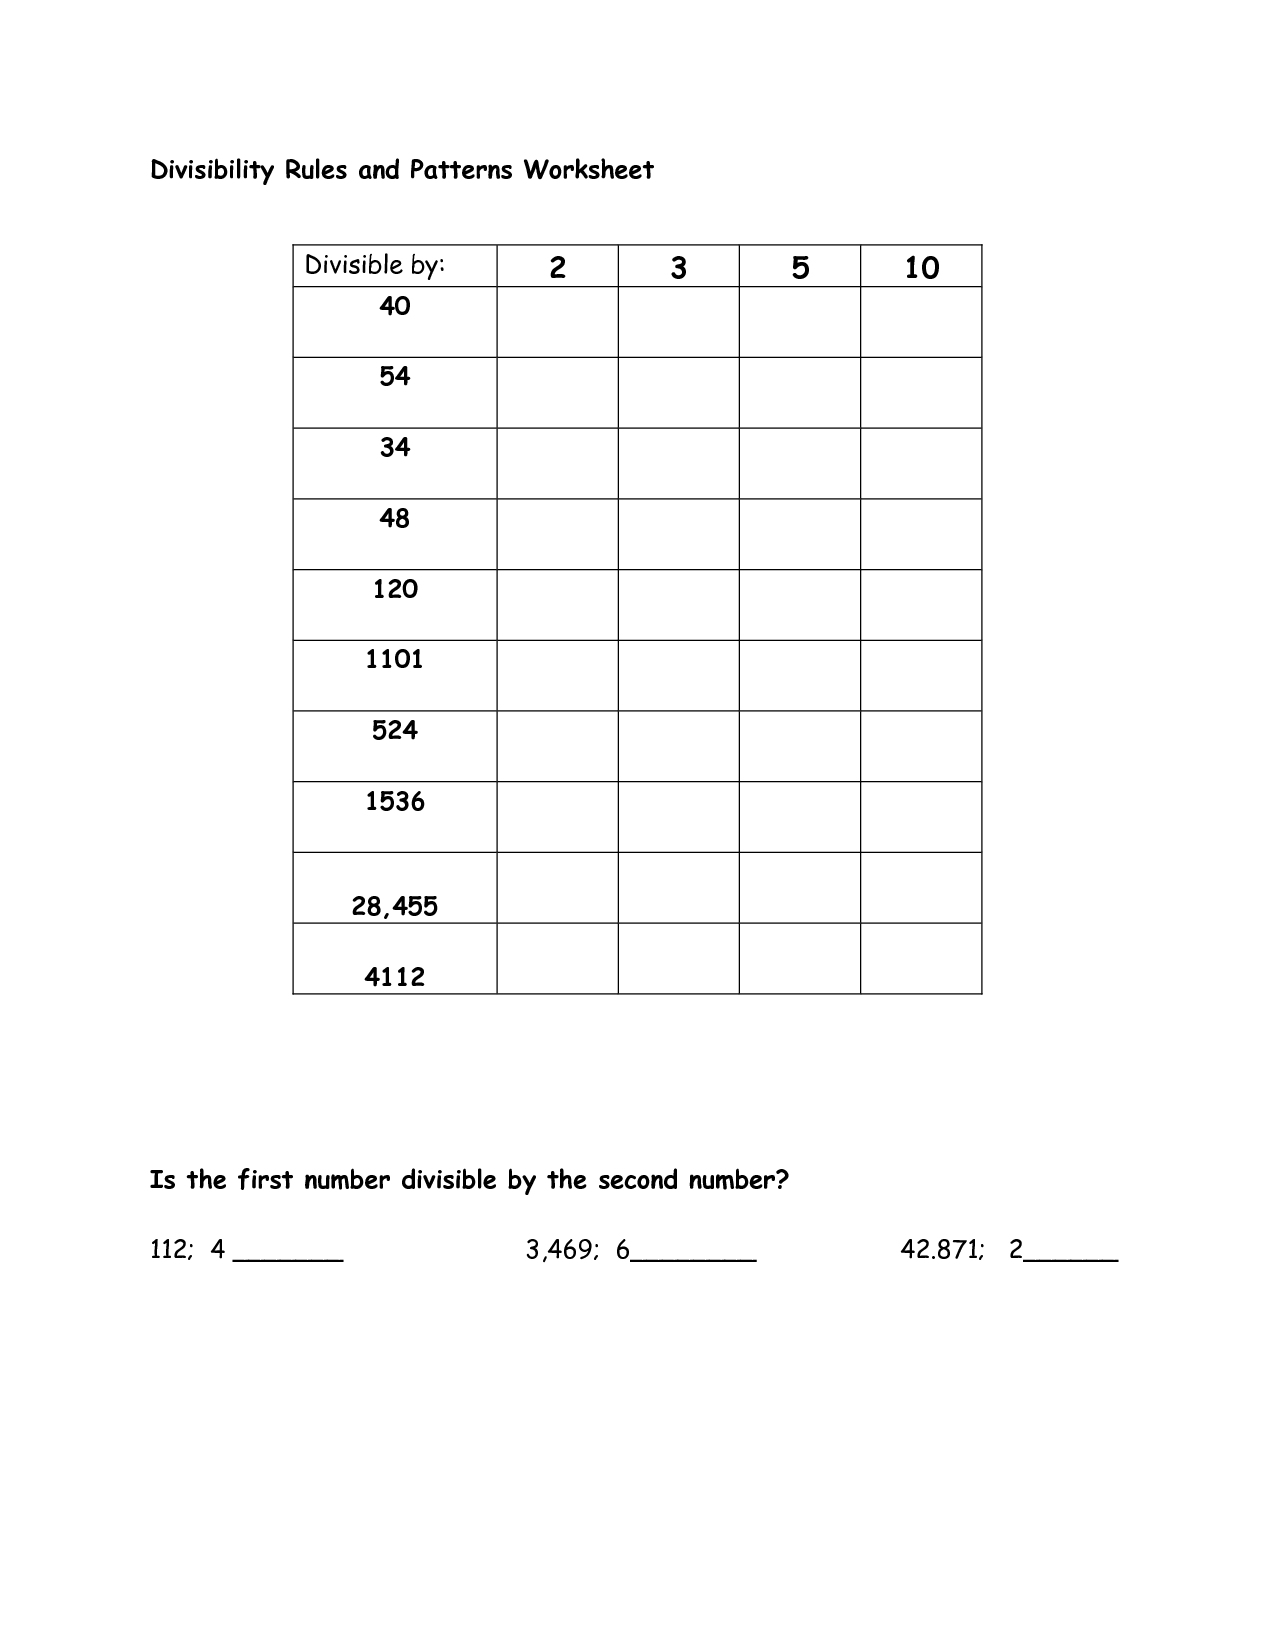 15-best-images-of-who-rules-worksheet-divisibility-rules-worksheet